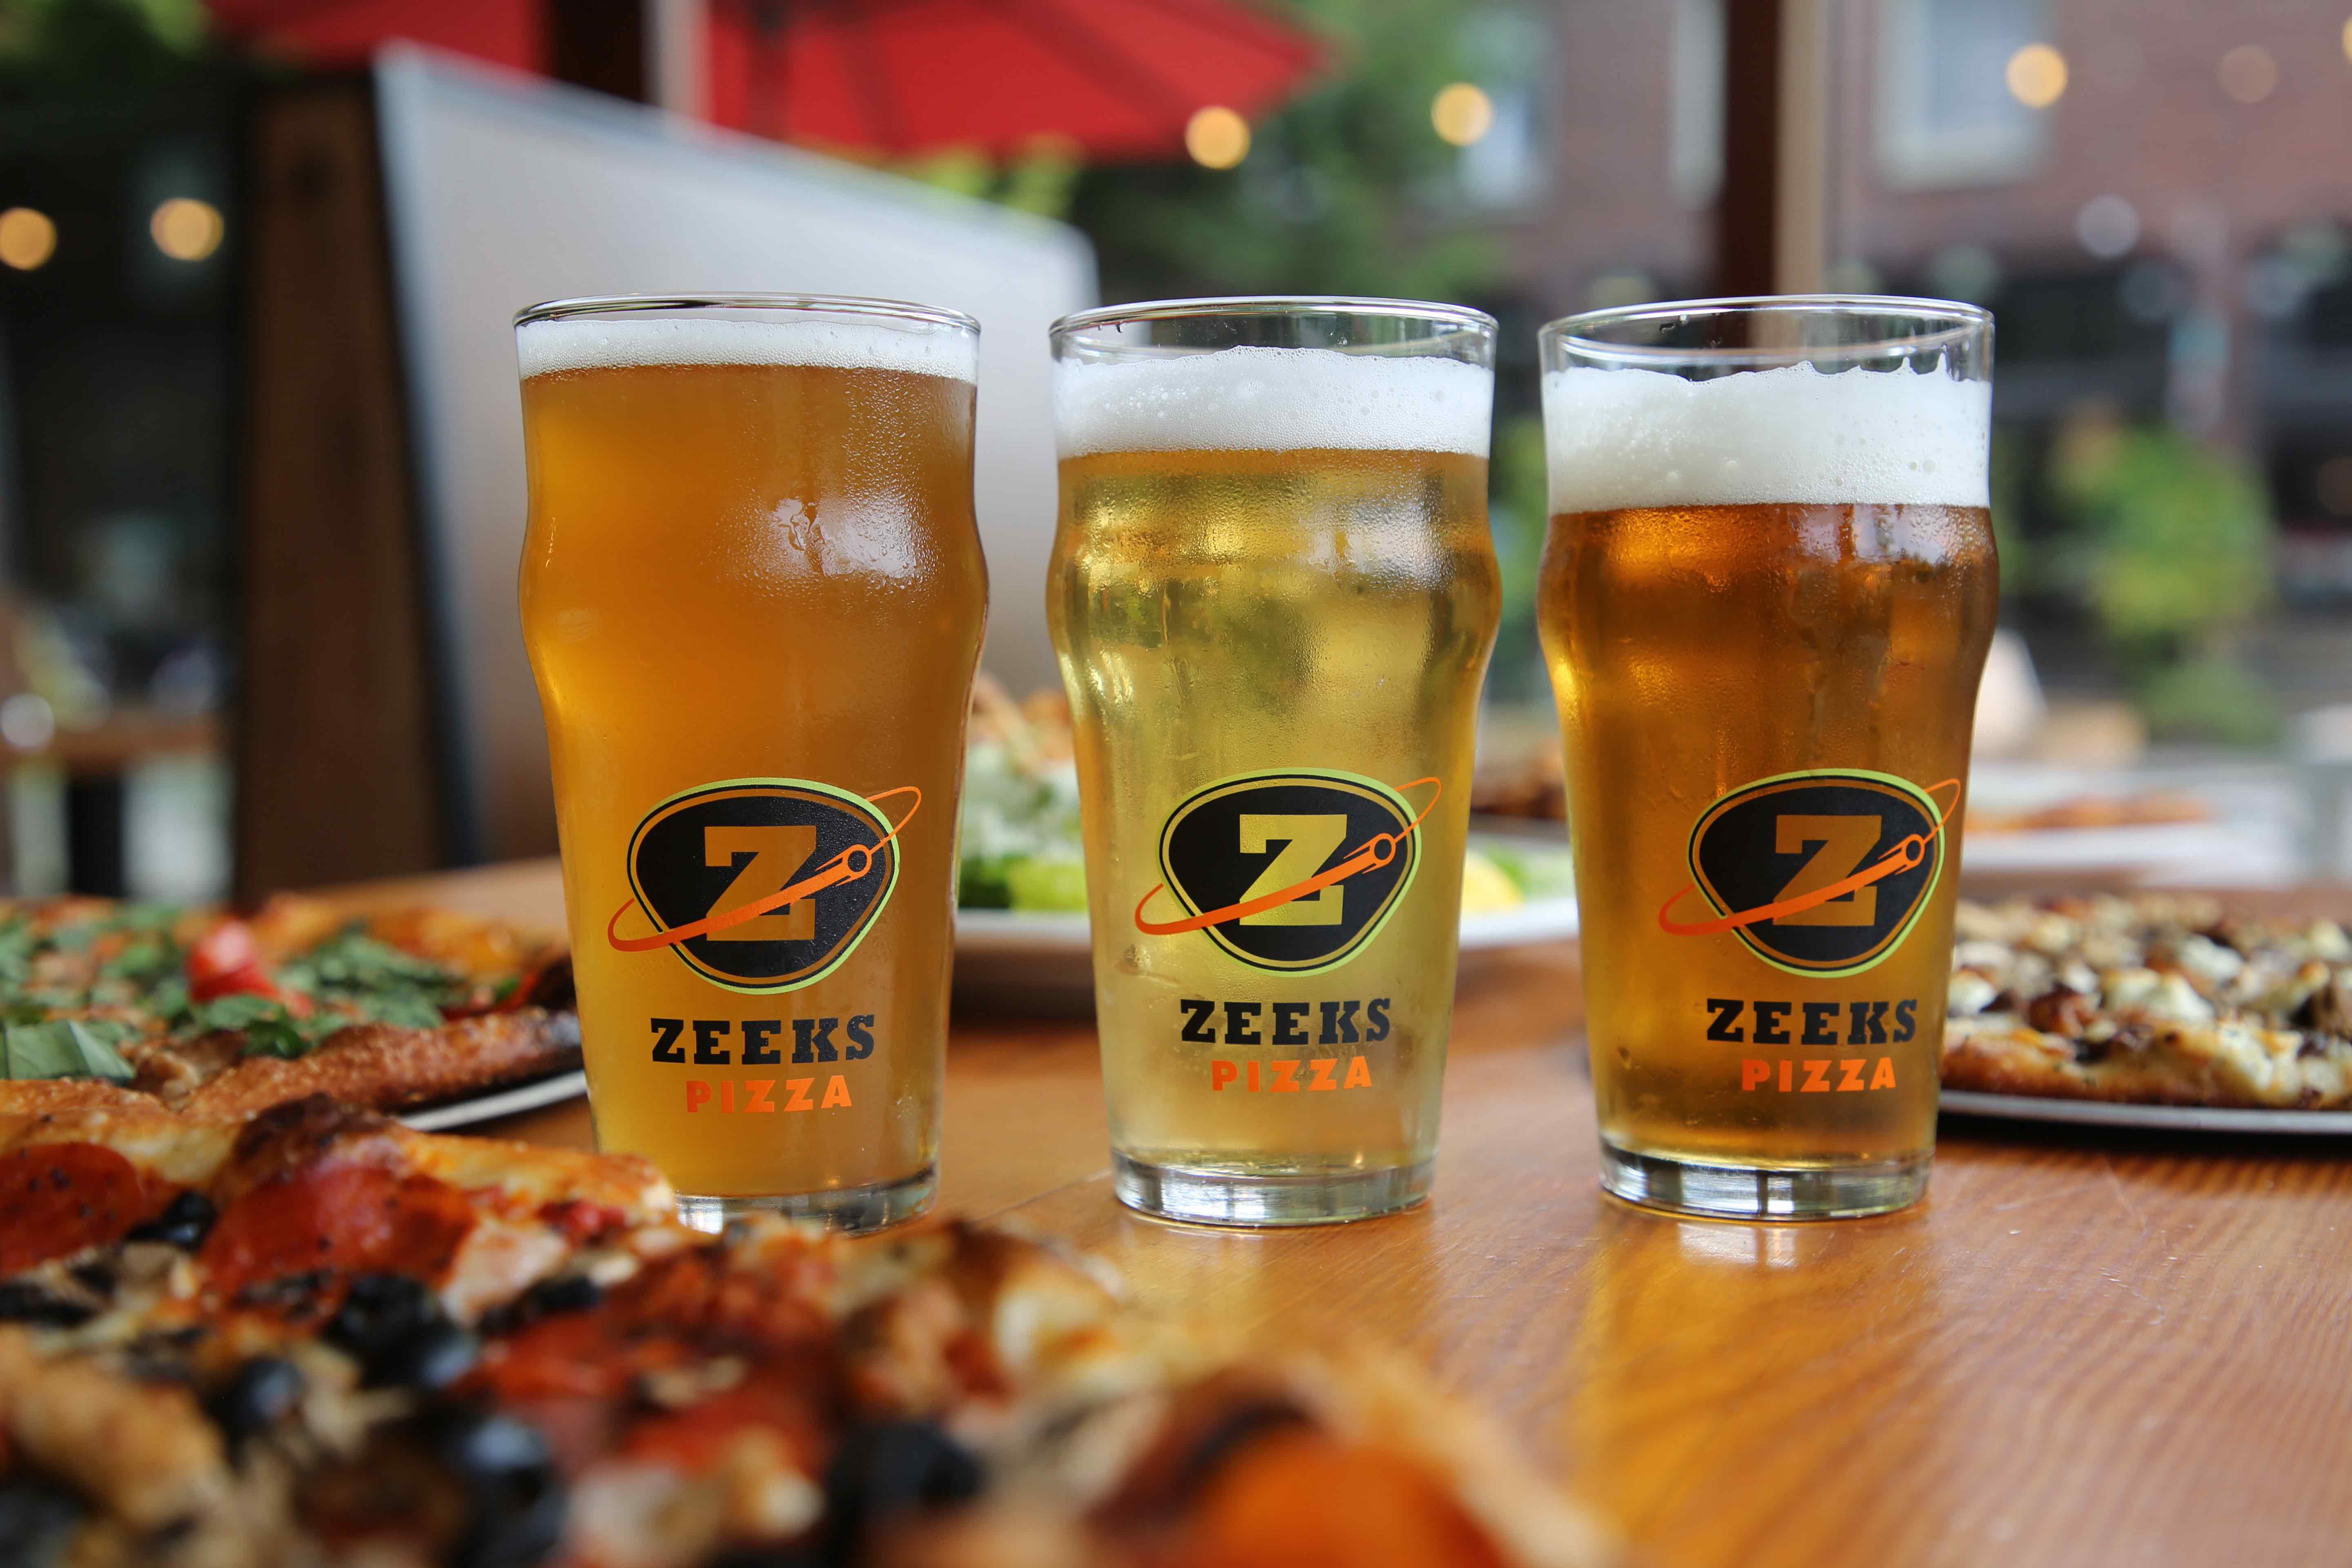 The pairing of pizza and beer is one of the benefits of visiting a Zeeks Pizza location (image courtesy of Zeeks Pizza)